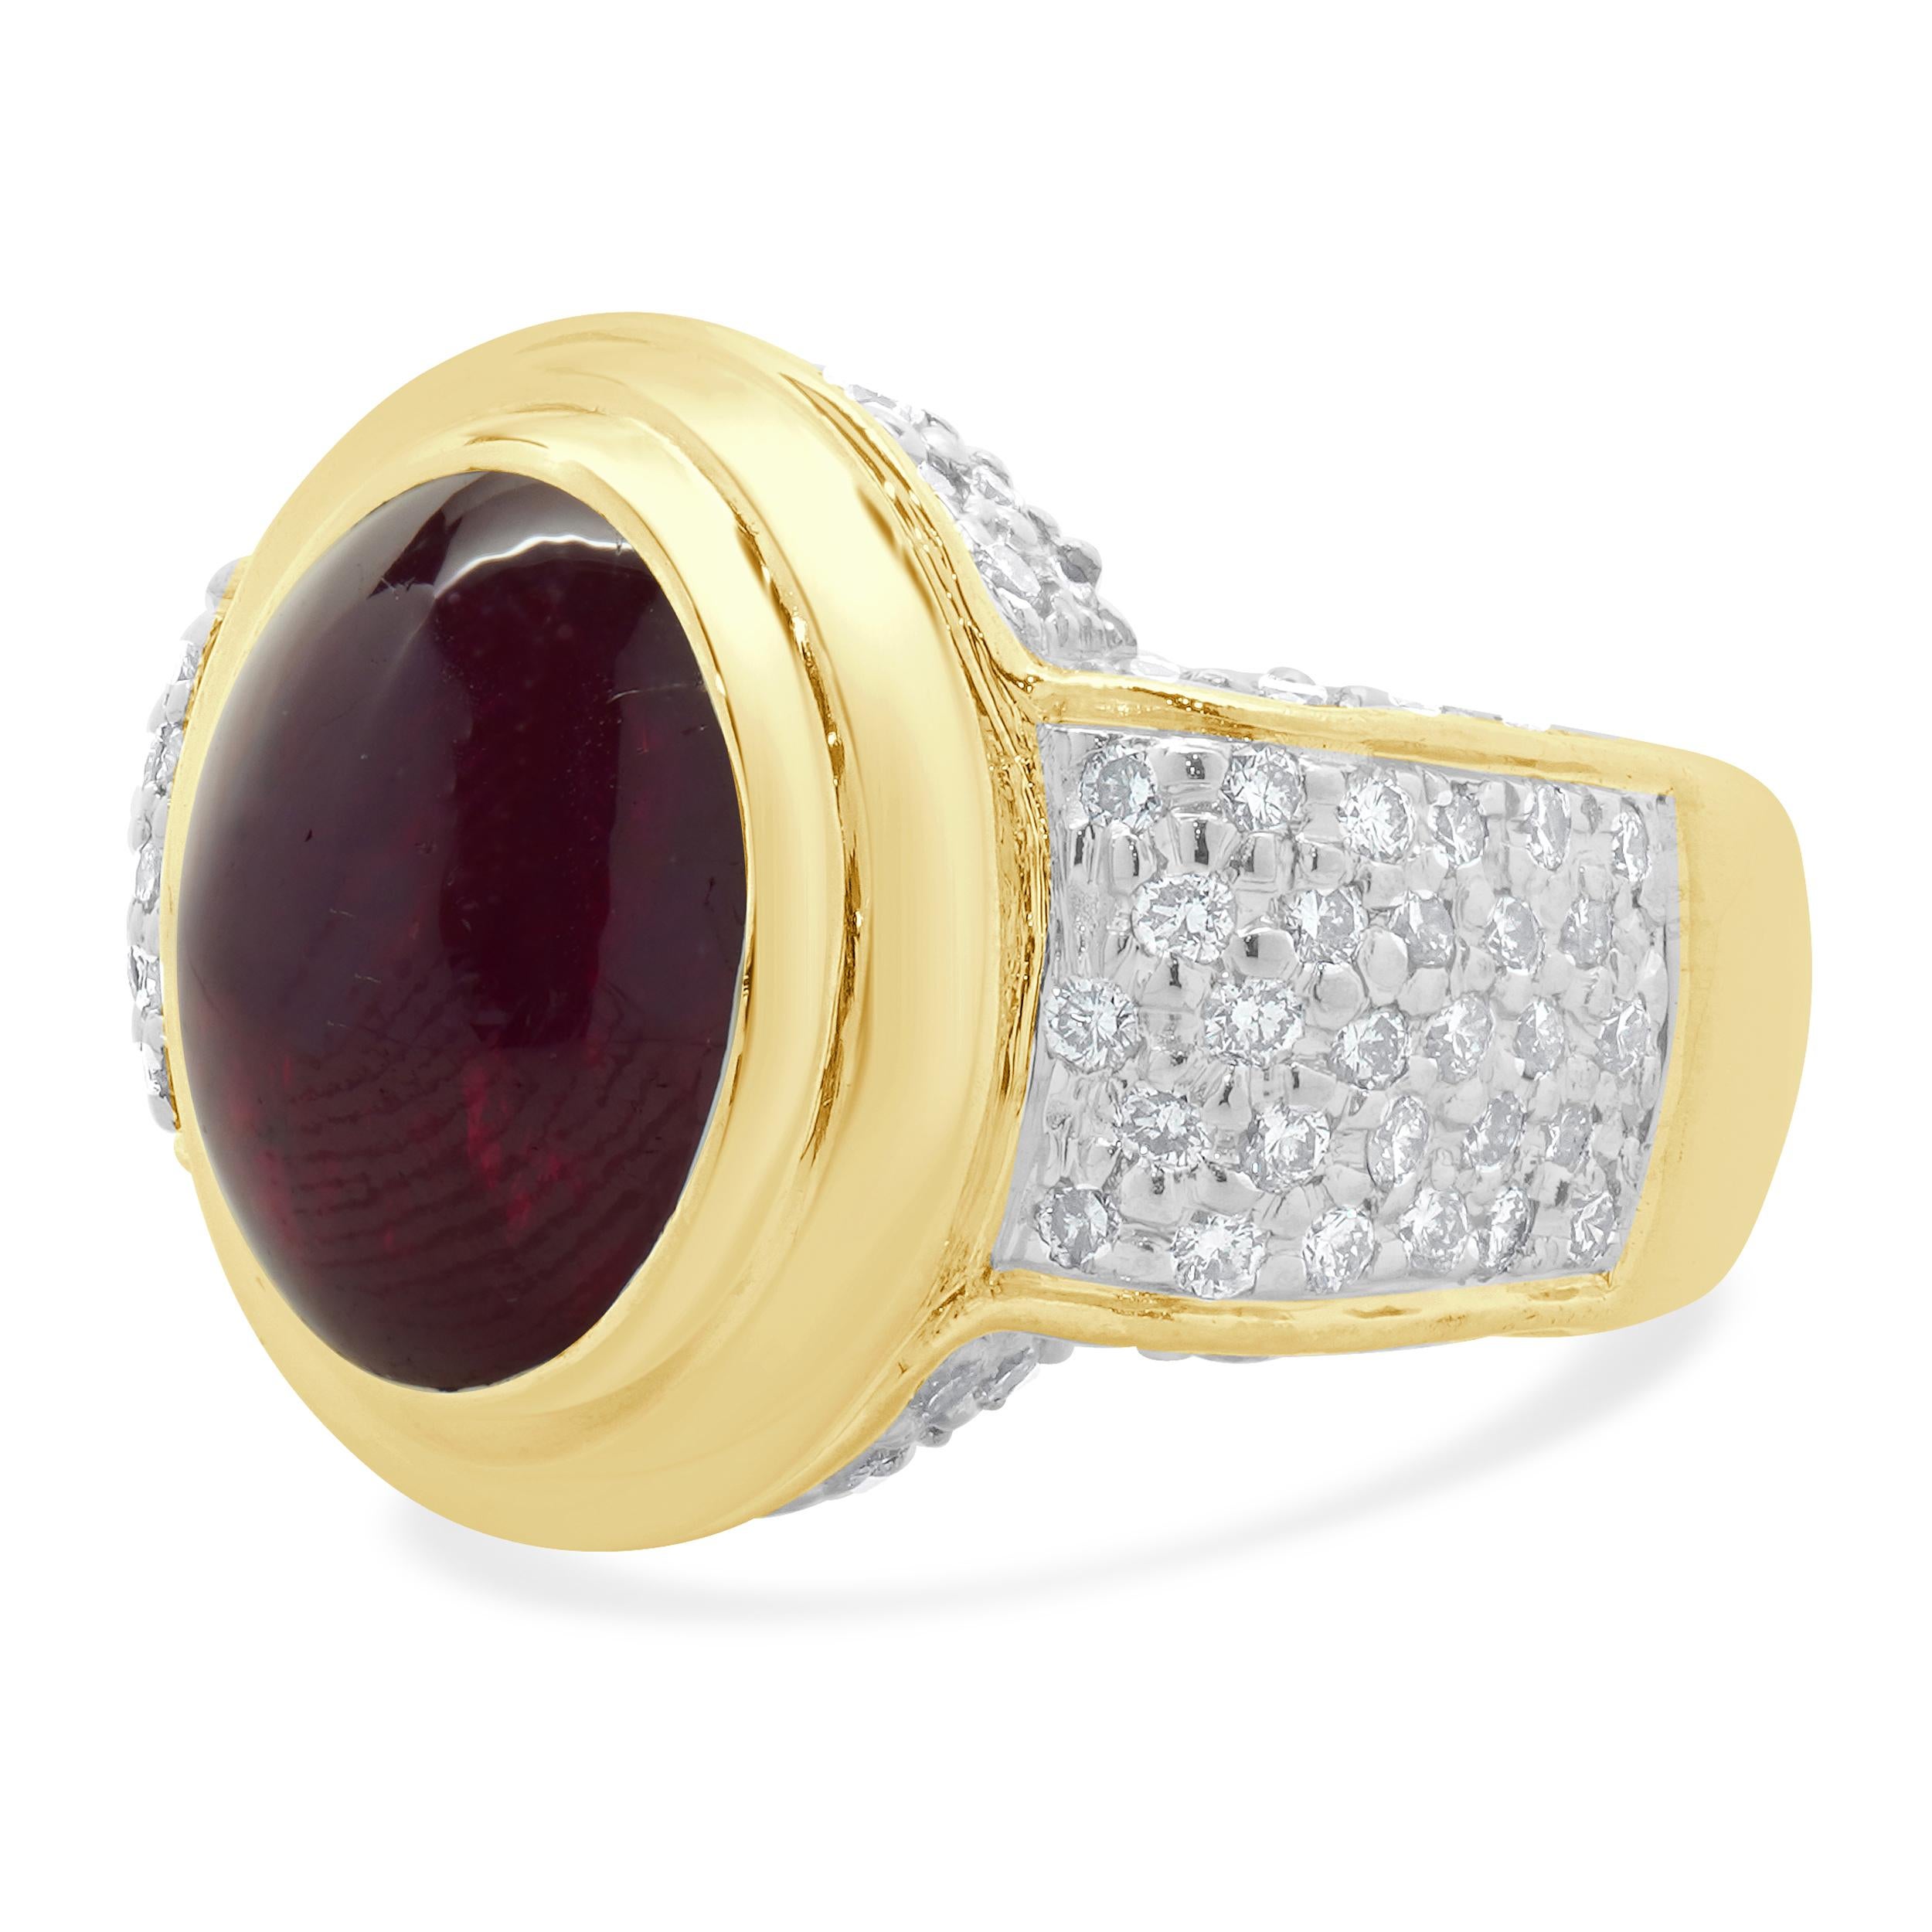 Designer: custom design
Material: 14K yellow gold
Diamond: 98 round brilliant cut = 1.30cttw
Color: H
Clarity: SI1
Ruby: 1 cabochon cut = 9.15ct
Dimensions: ring top measures 16.8mm wide
Ring Size: 6 (please allow two extra shipping days for sizing